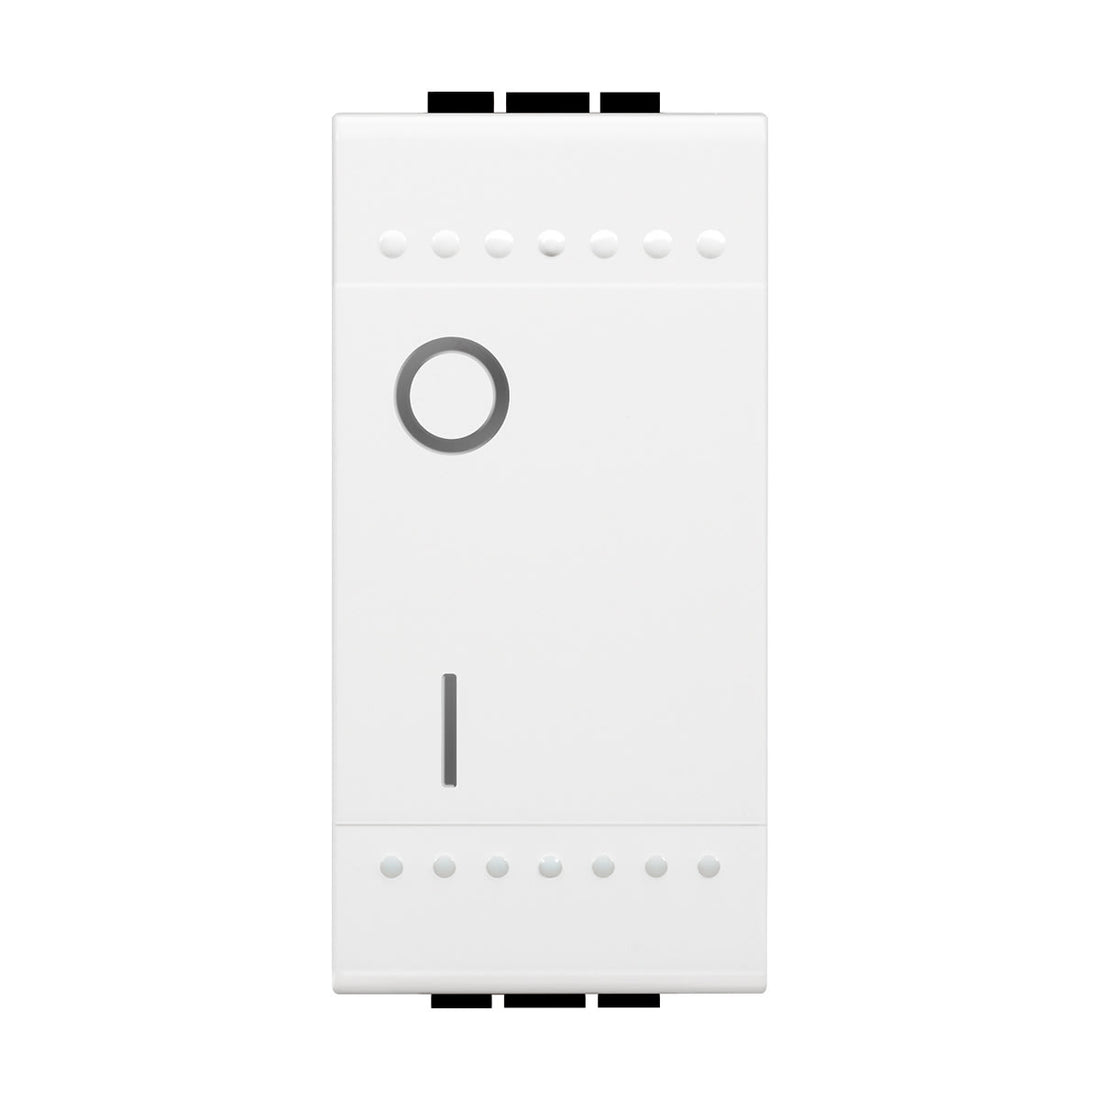 LIVING LIGHT DOUBLE POLE SWITCH 16A WHITE